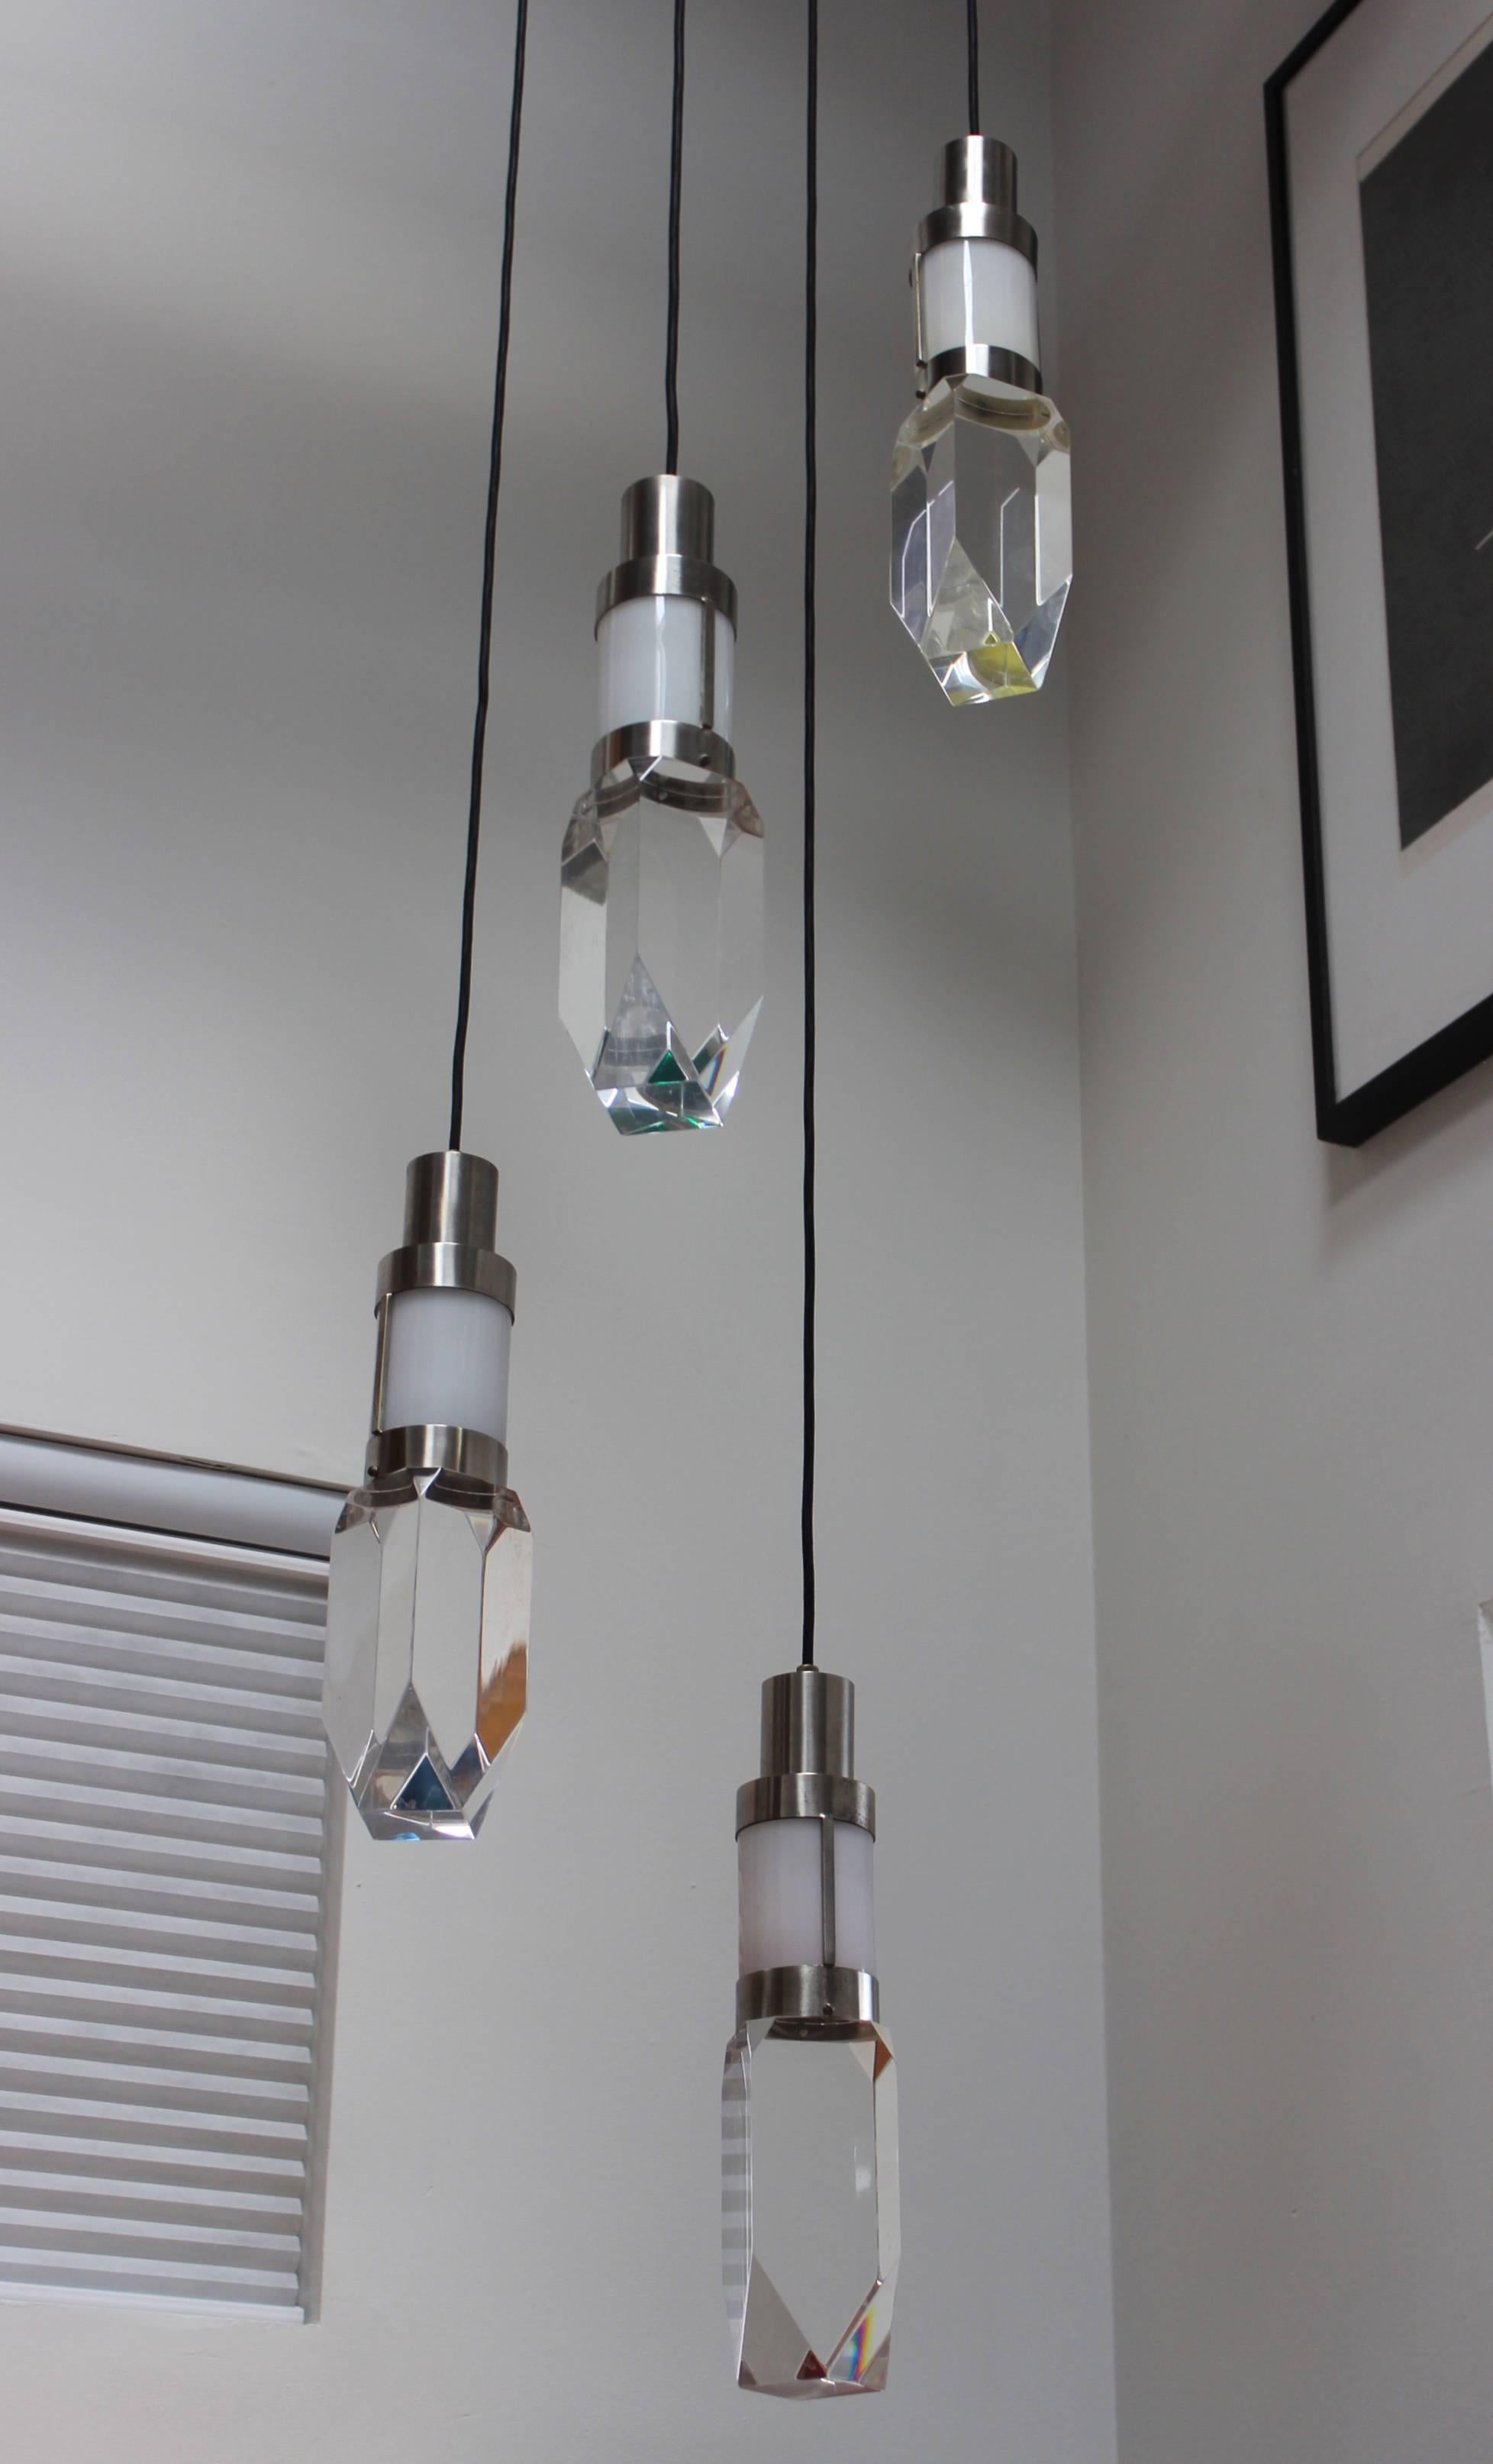 1960s four lights hanging chandelier by Stilnovo, nickel and Lucite newly rewired and ready to use.

The height can be adjusted.